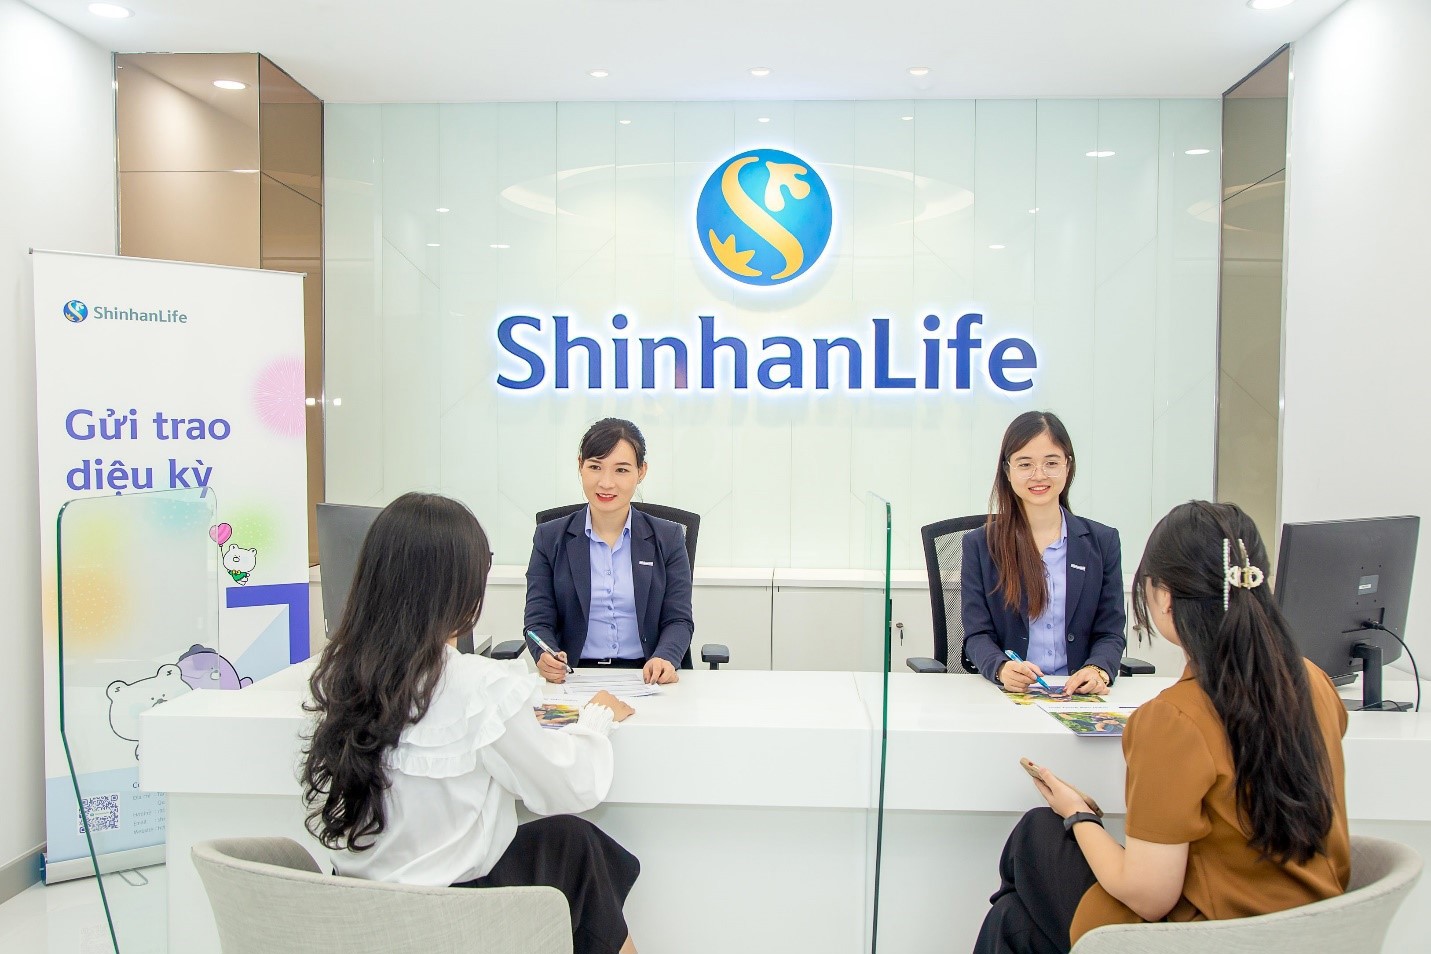 Trung t&acirc;m Dịch vụ kh&aacute;ch h&agrave;ng của Shinhan Life Việt Nam tại Tầng 8, th&aacute;p A, t&ograve;a nh&agrave; Sky City, 88 L&aacute;ng Hạ, H&agrave; Nội.